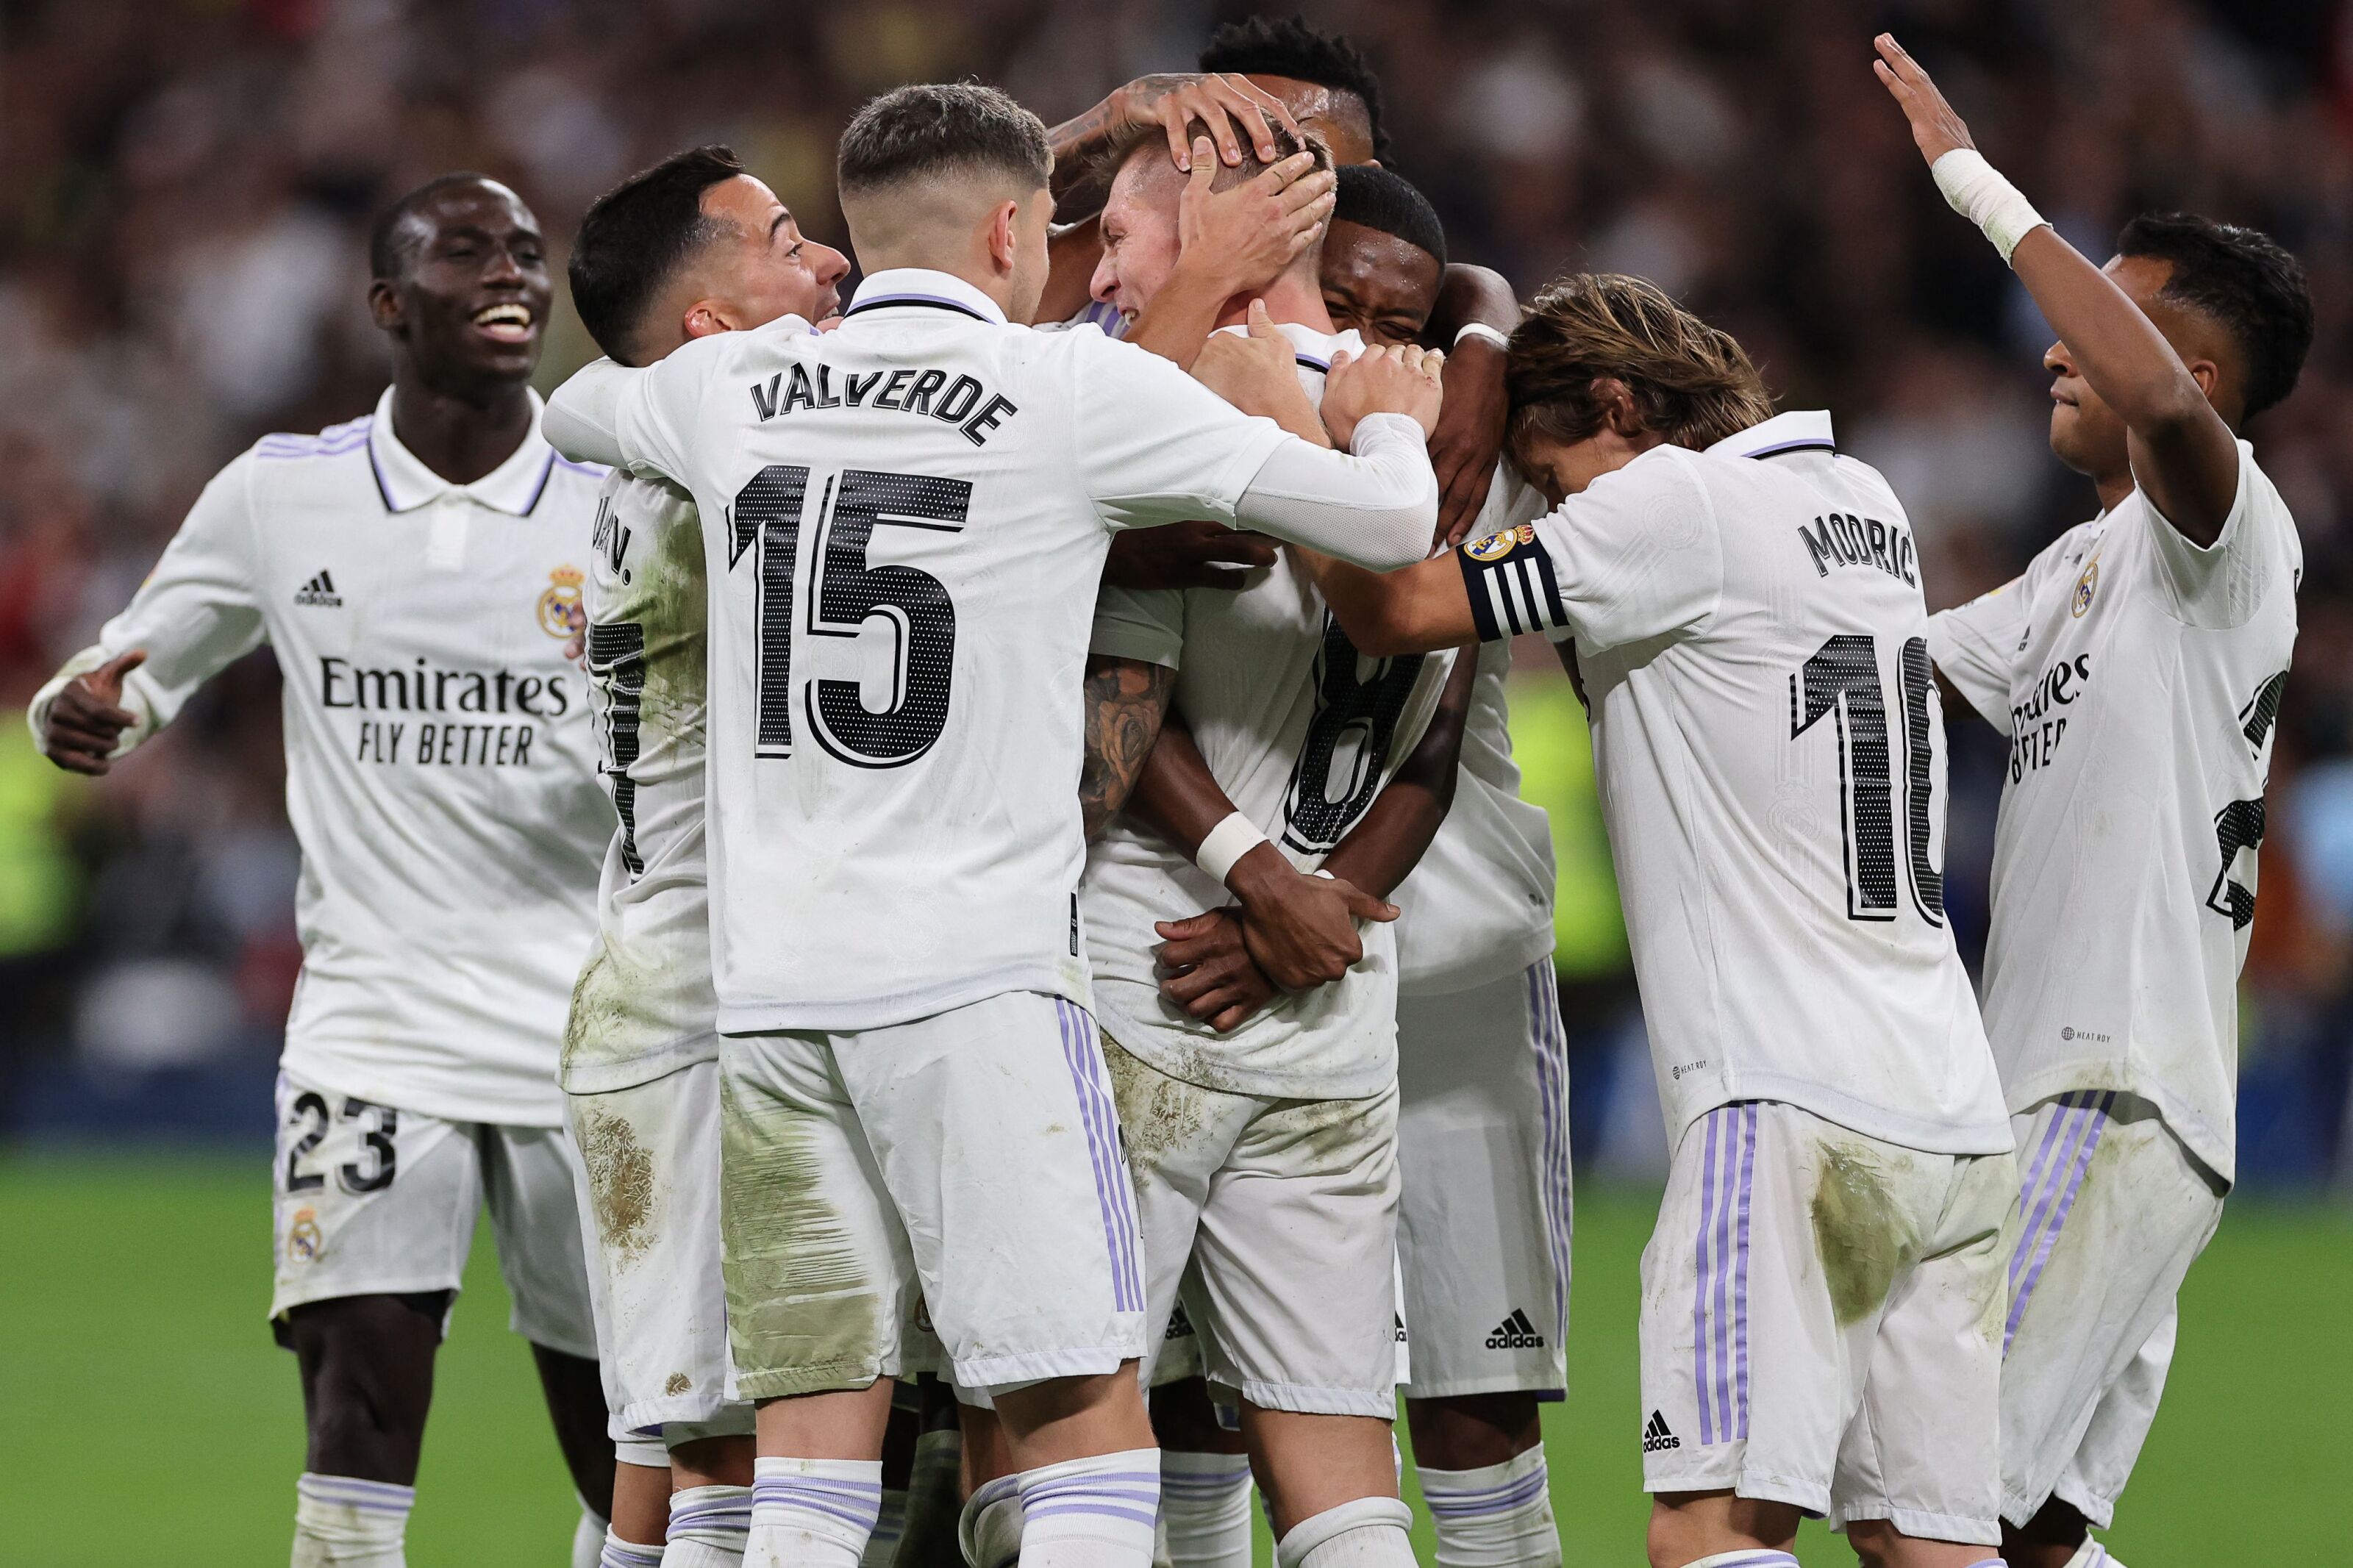 Real Madrid get their most important result of the season